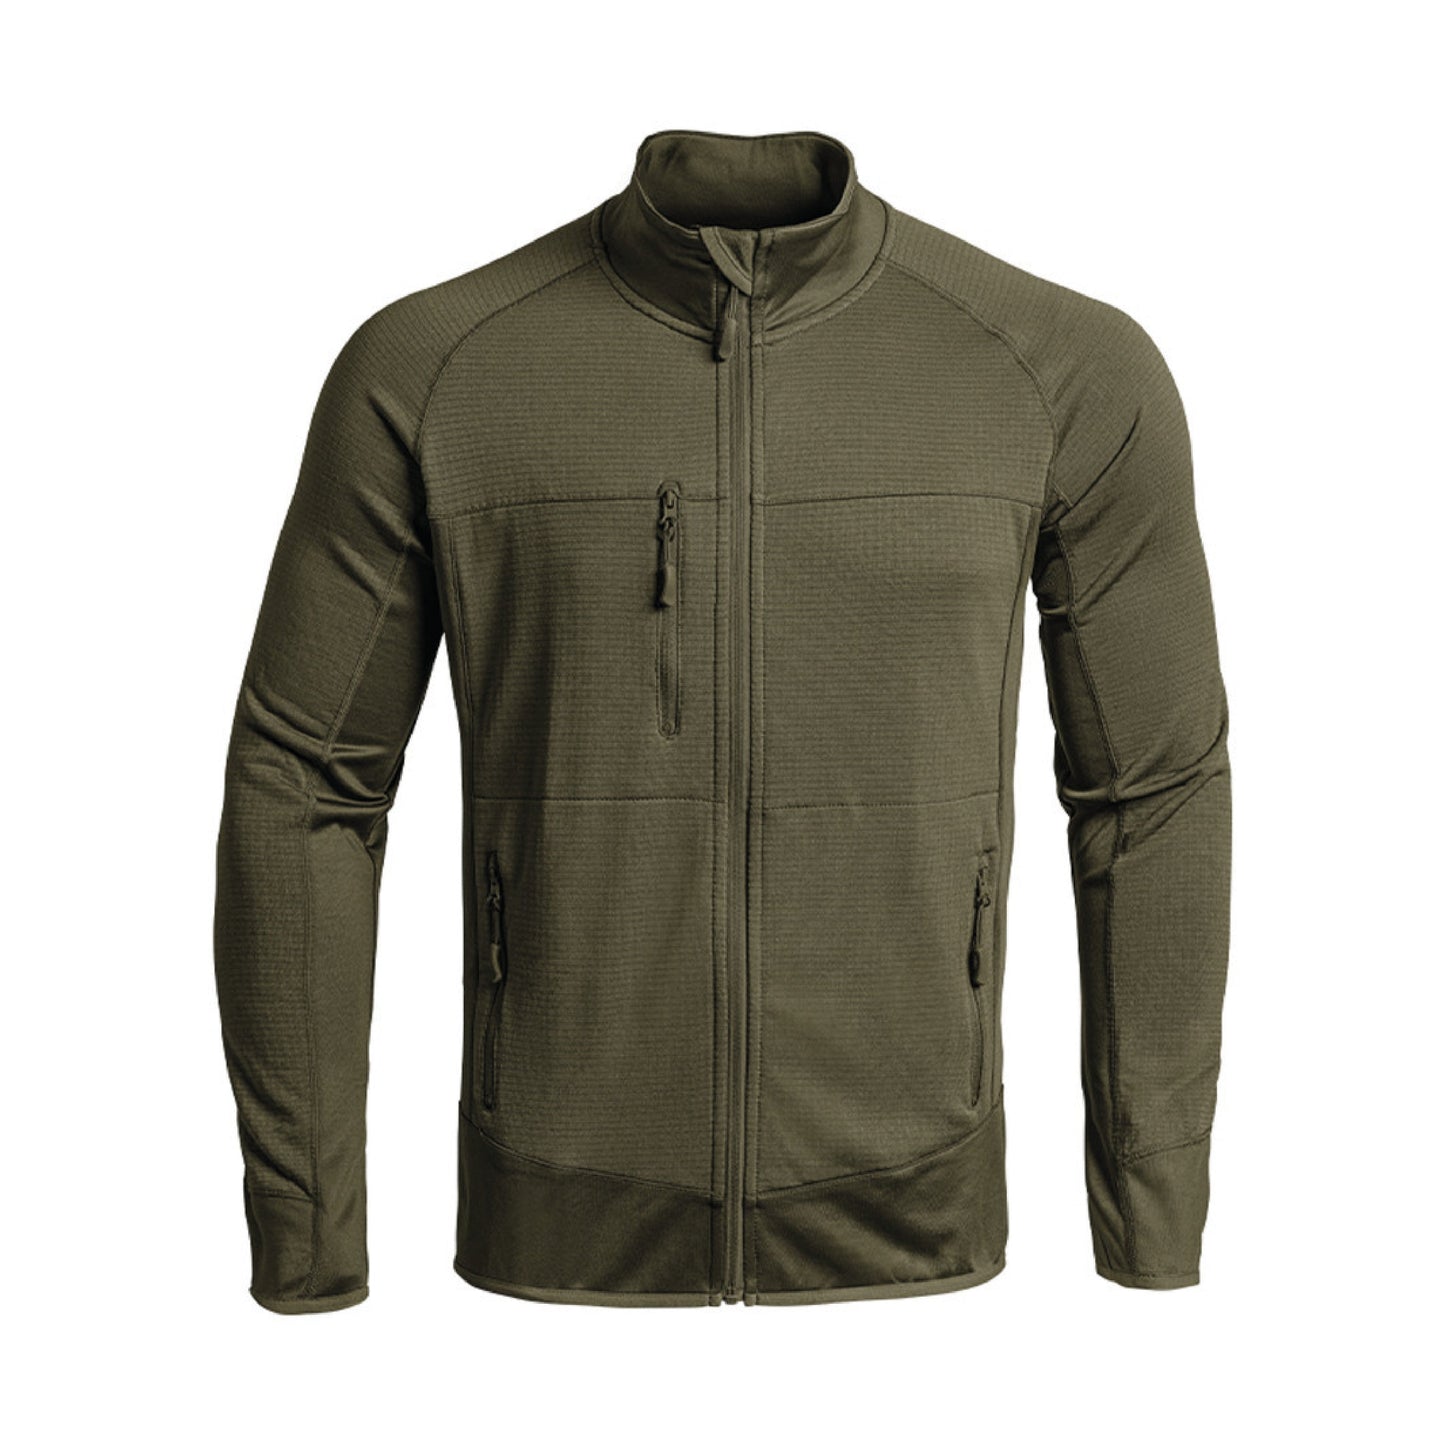 A10 Thermo Performer Basis-Jacke oliv